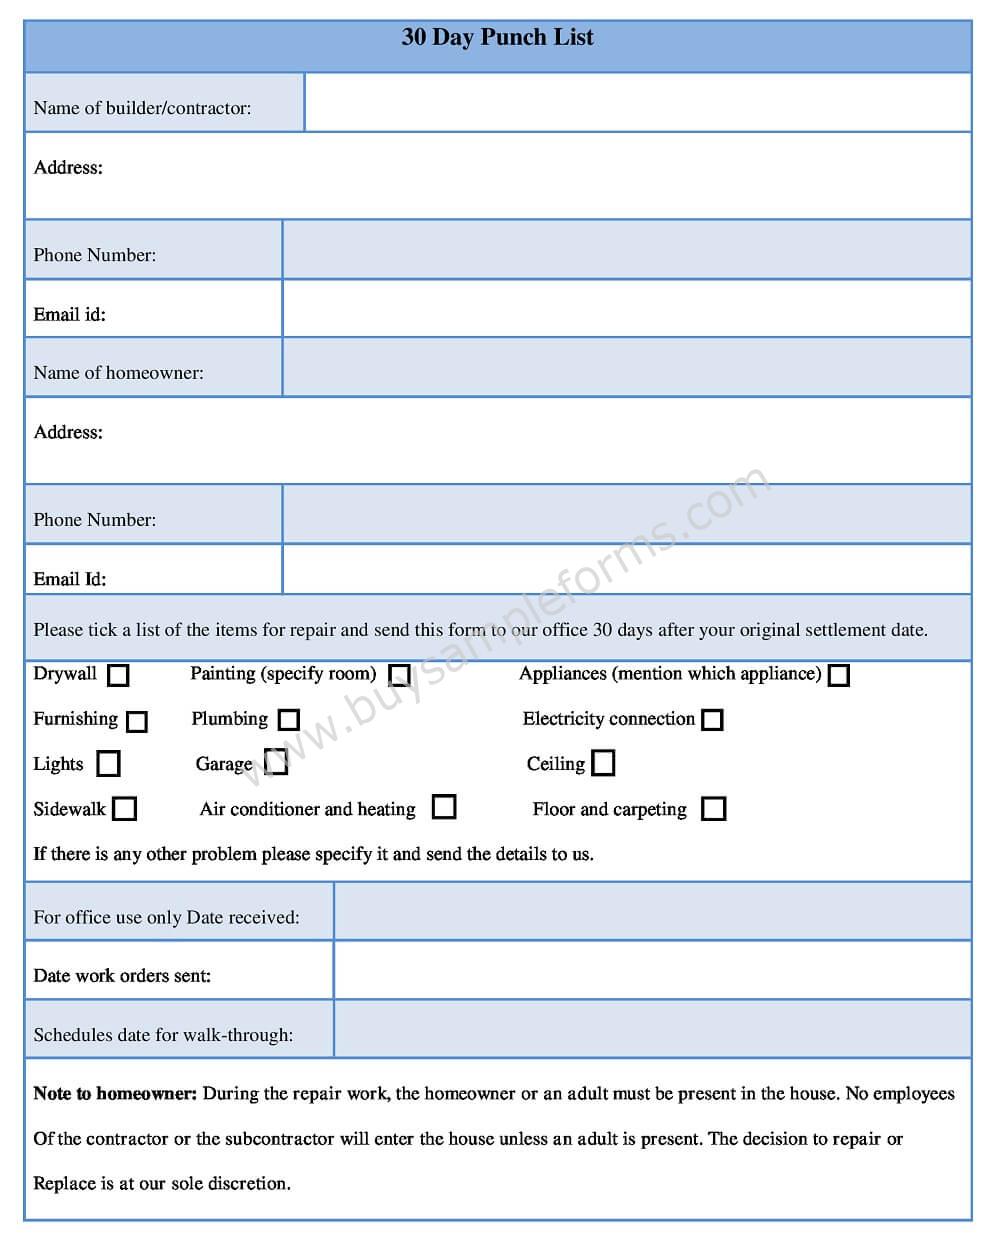 download-30-day-punch-list-form-in-word-sample-punch-list-template